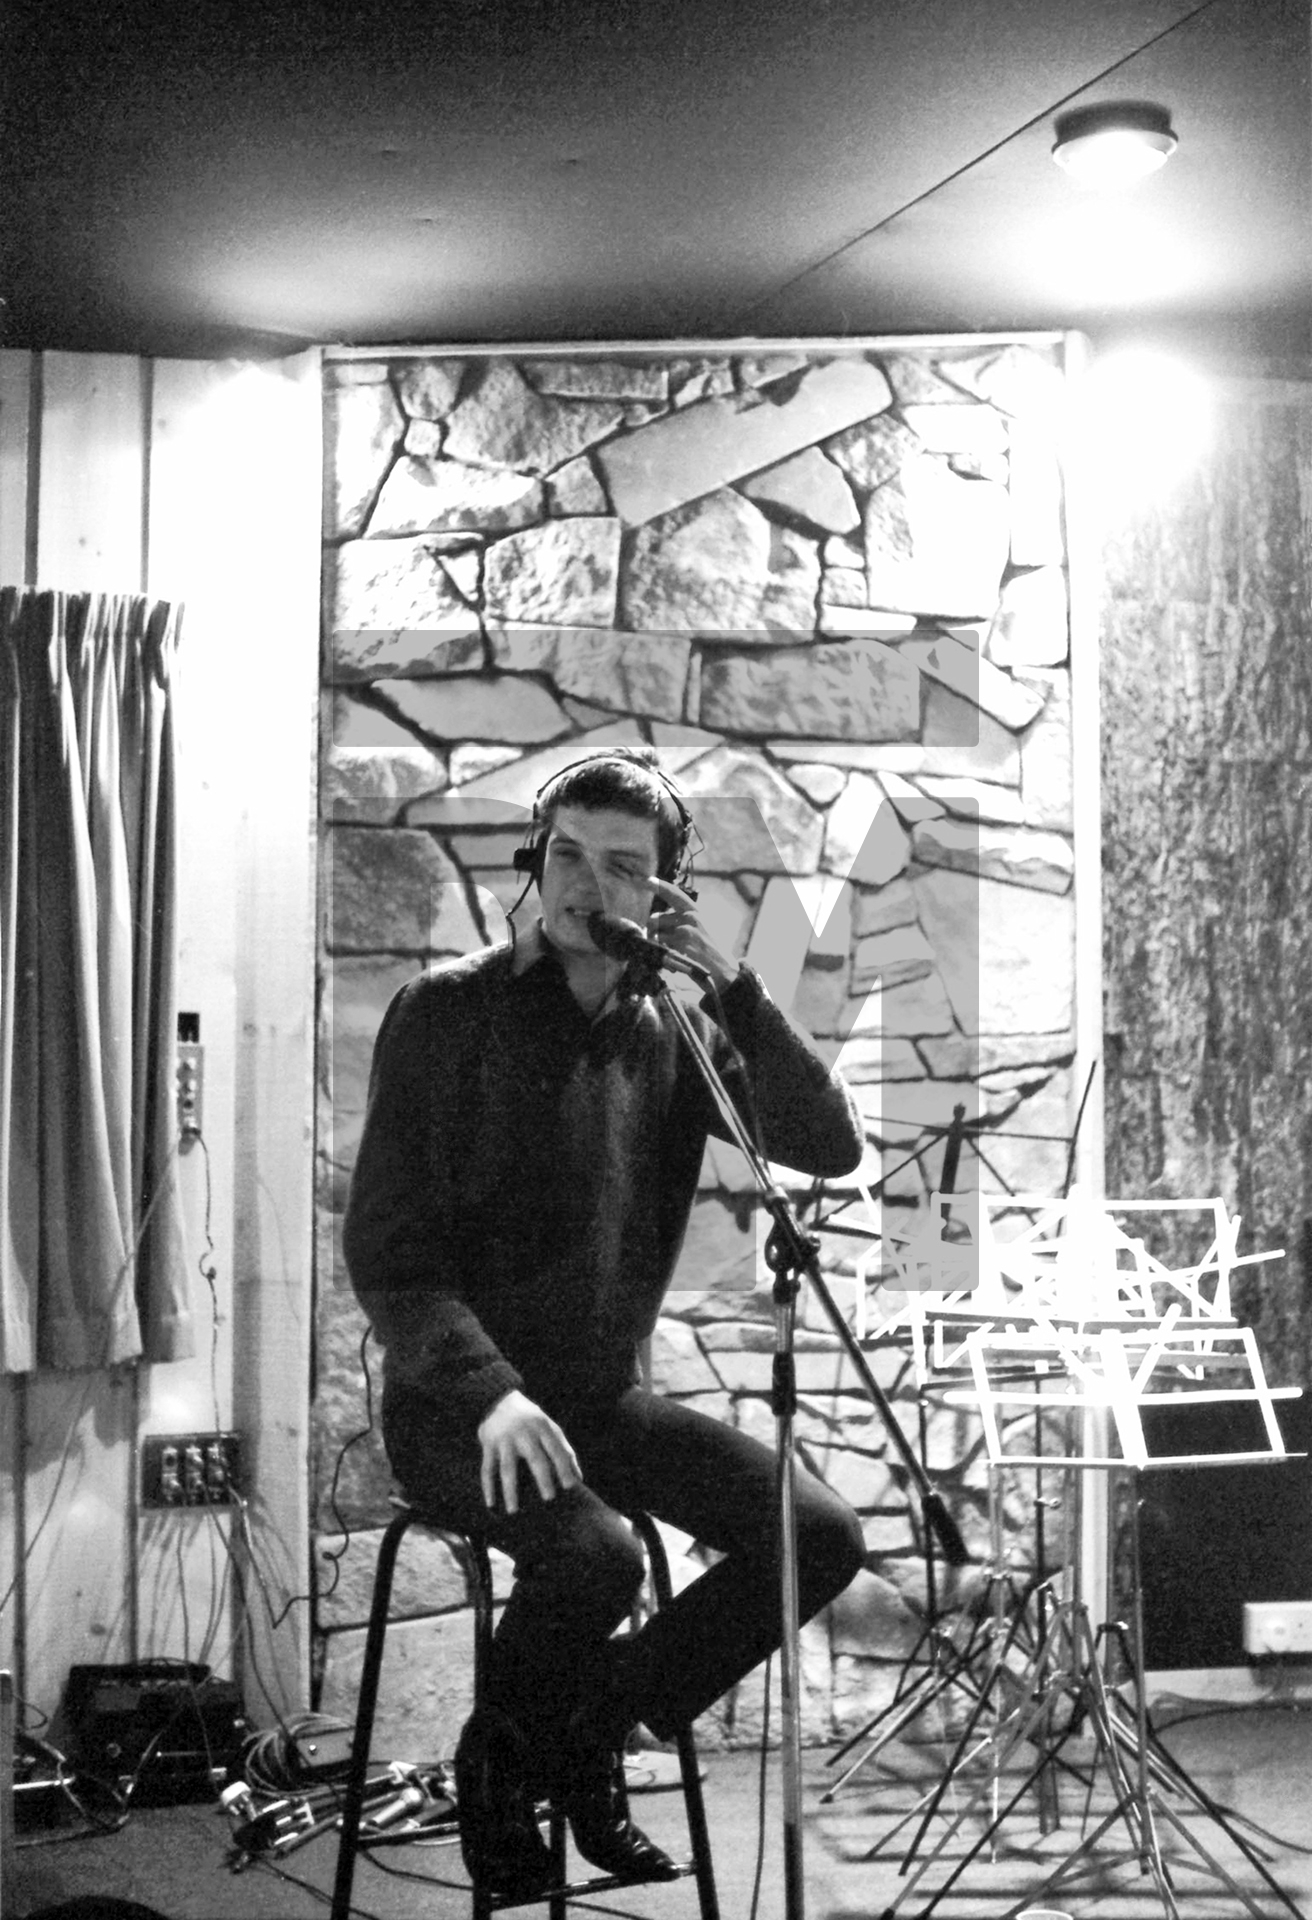 Ian Curtis of Joy Division at Pennine Sound Studio, Oldham. January 1980 by Daniel Meadows